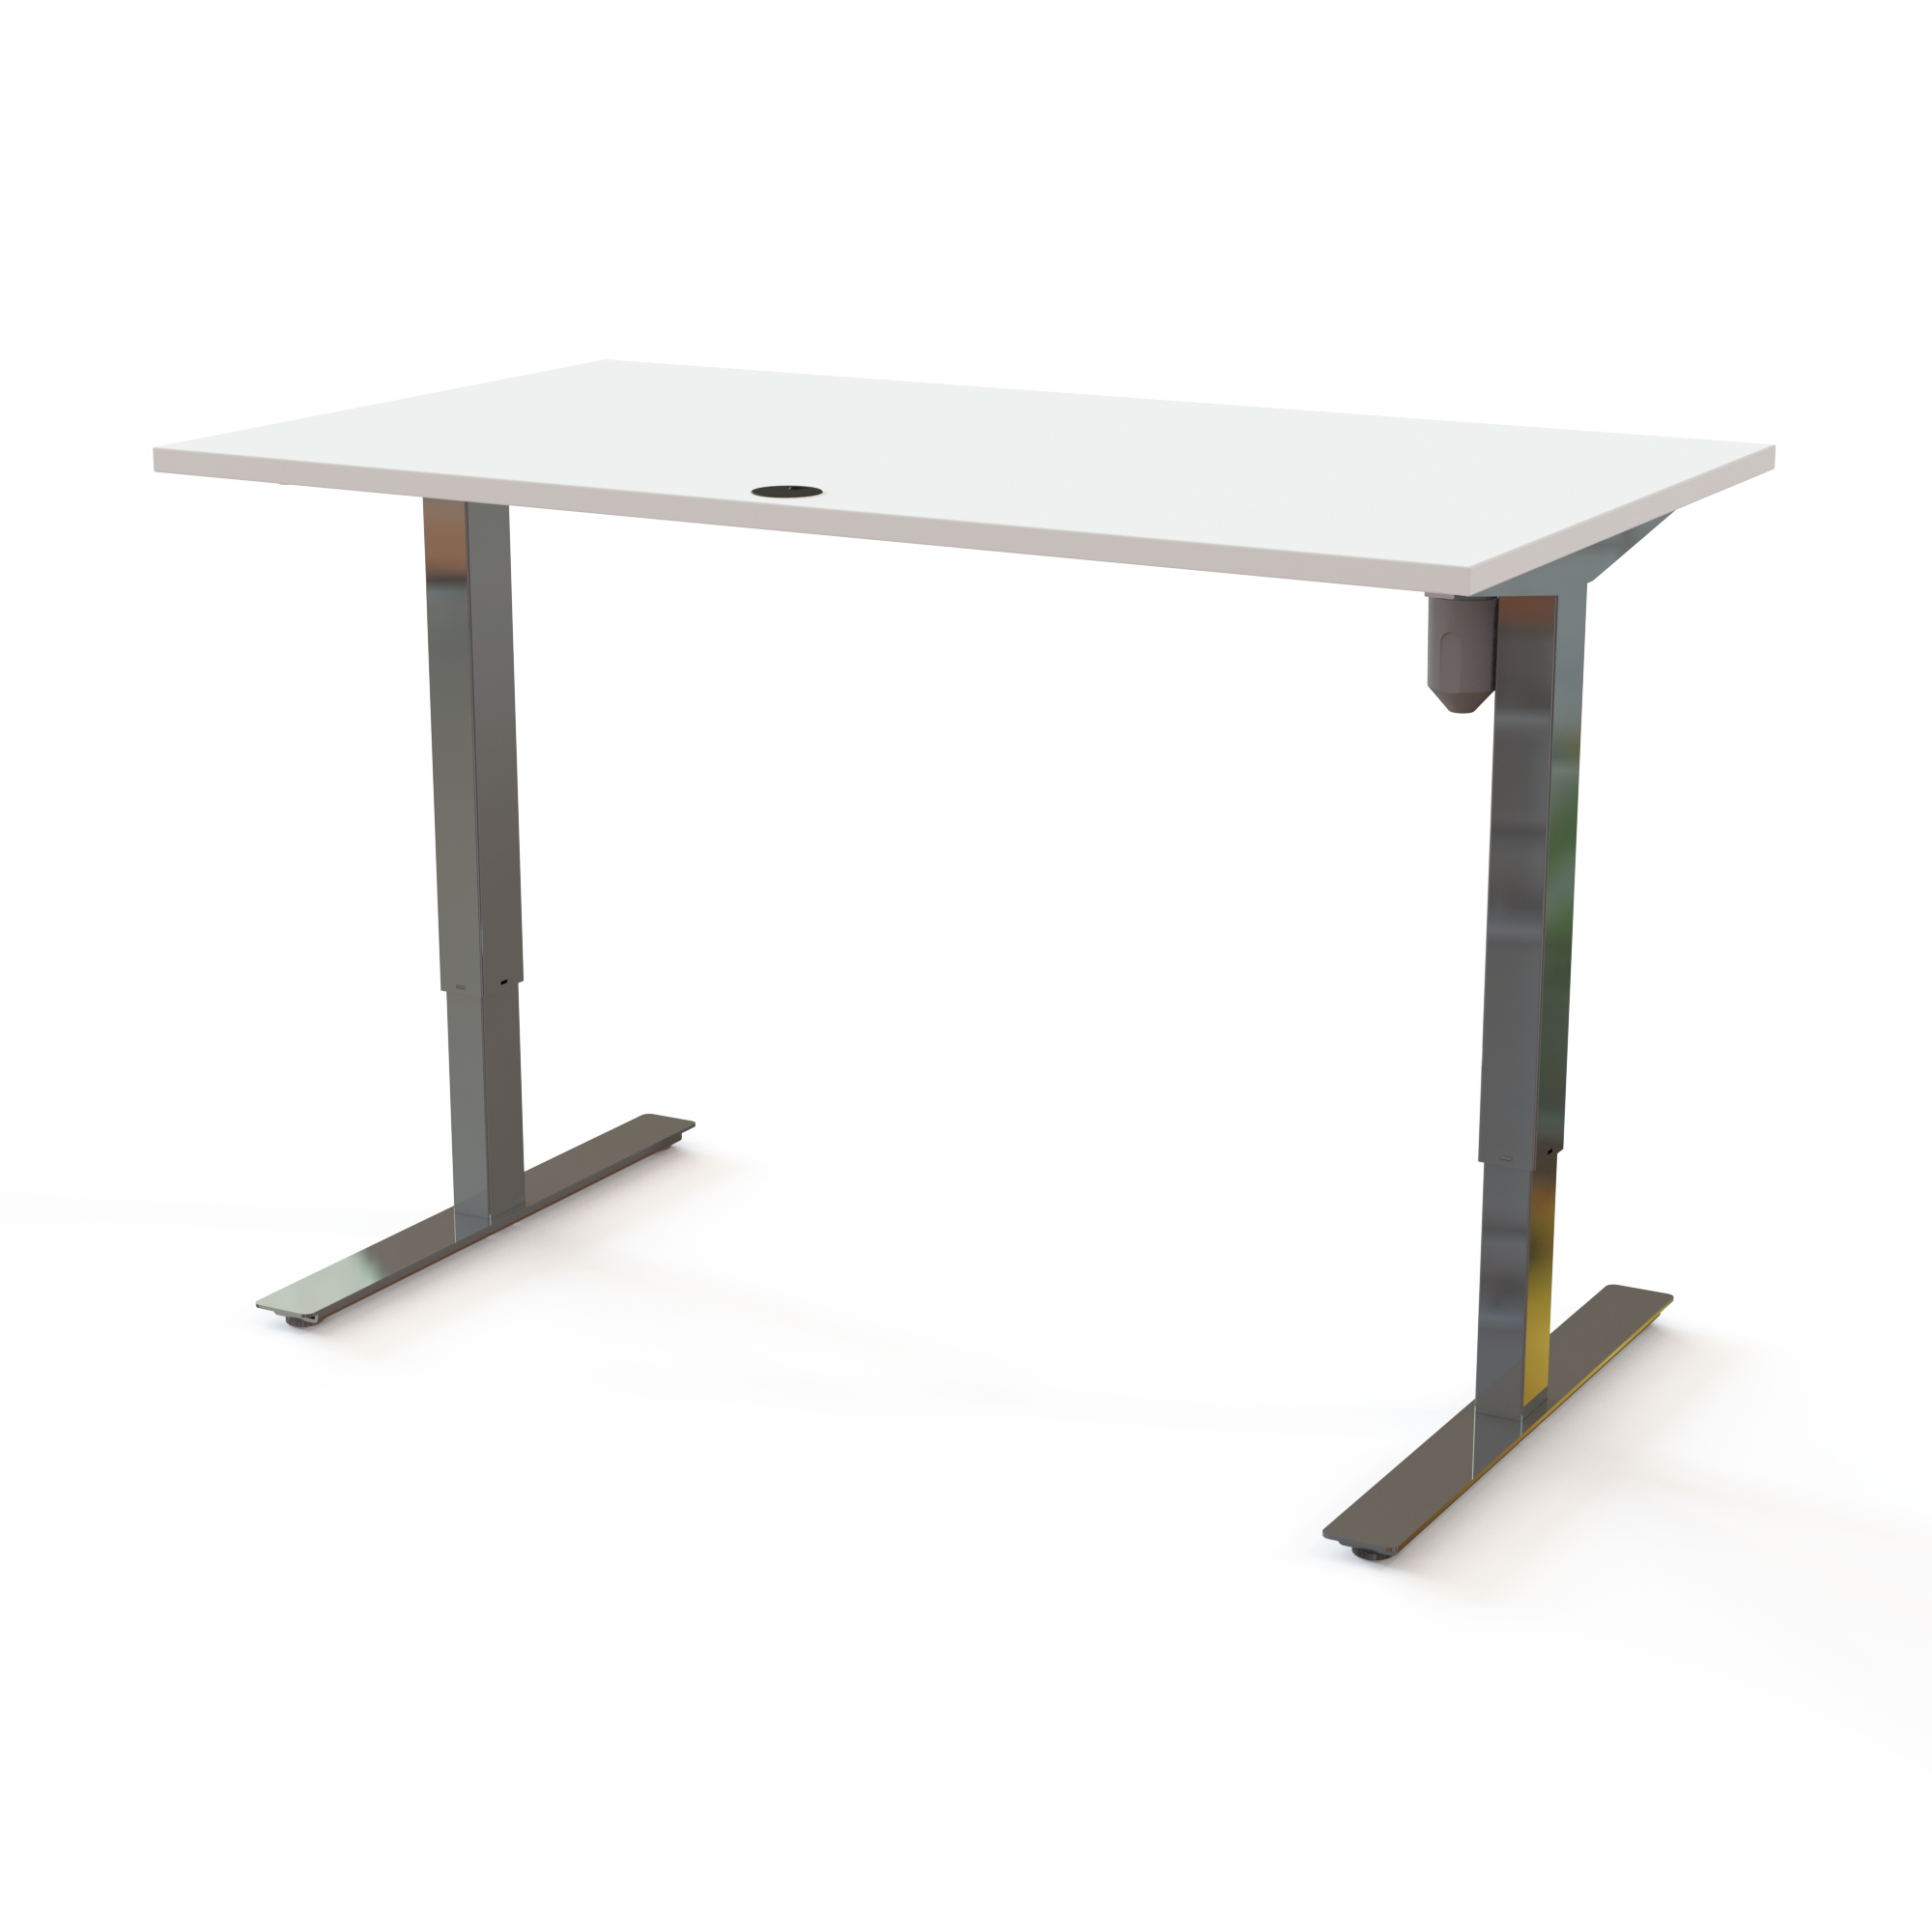 Electric Adjustable Desk | 140x80 cm | White with chrome frame